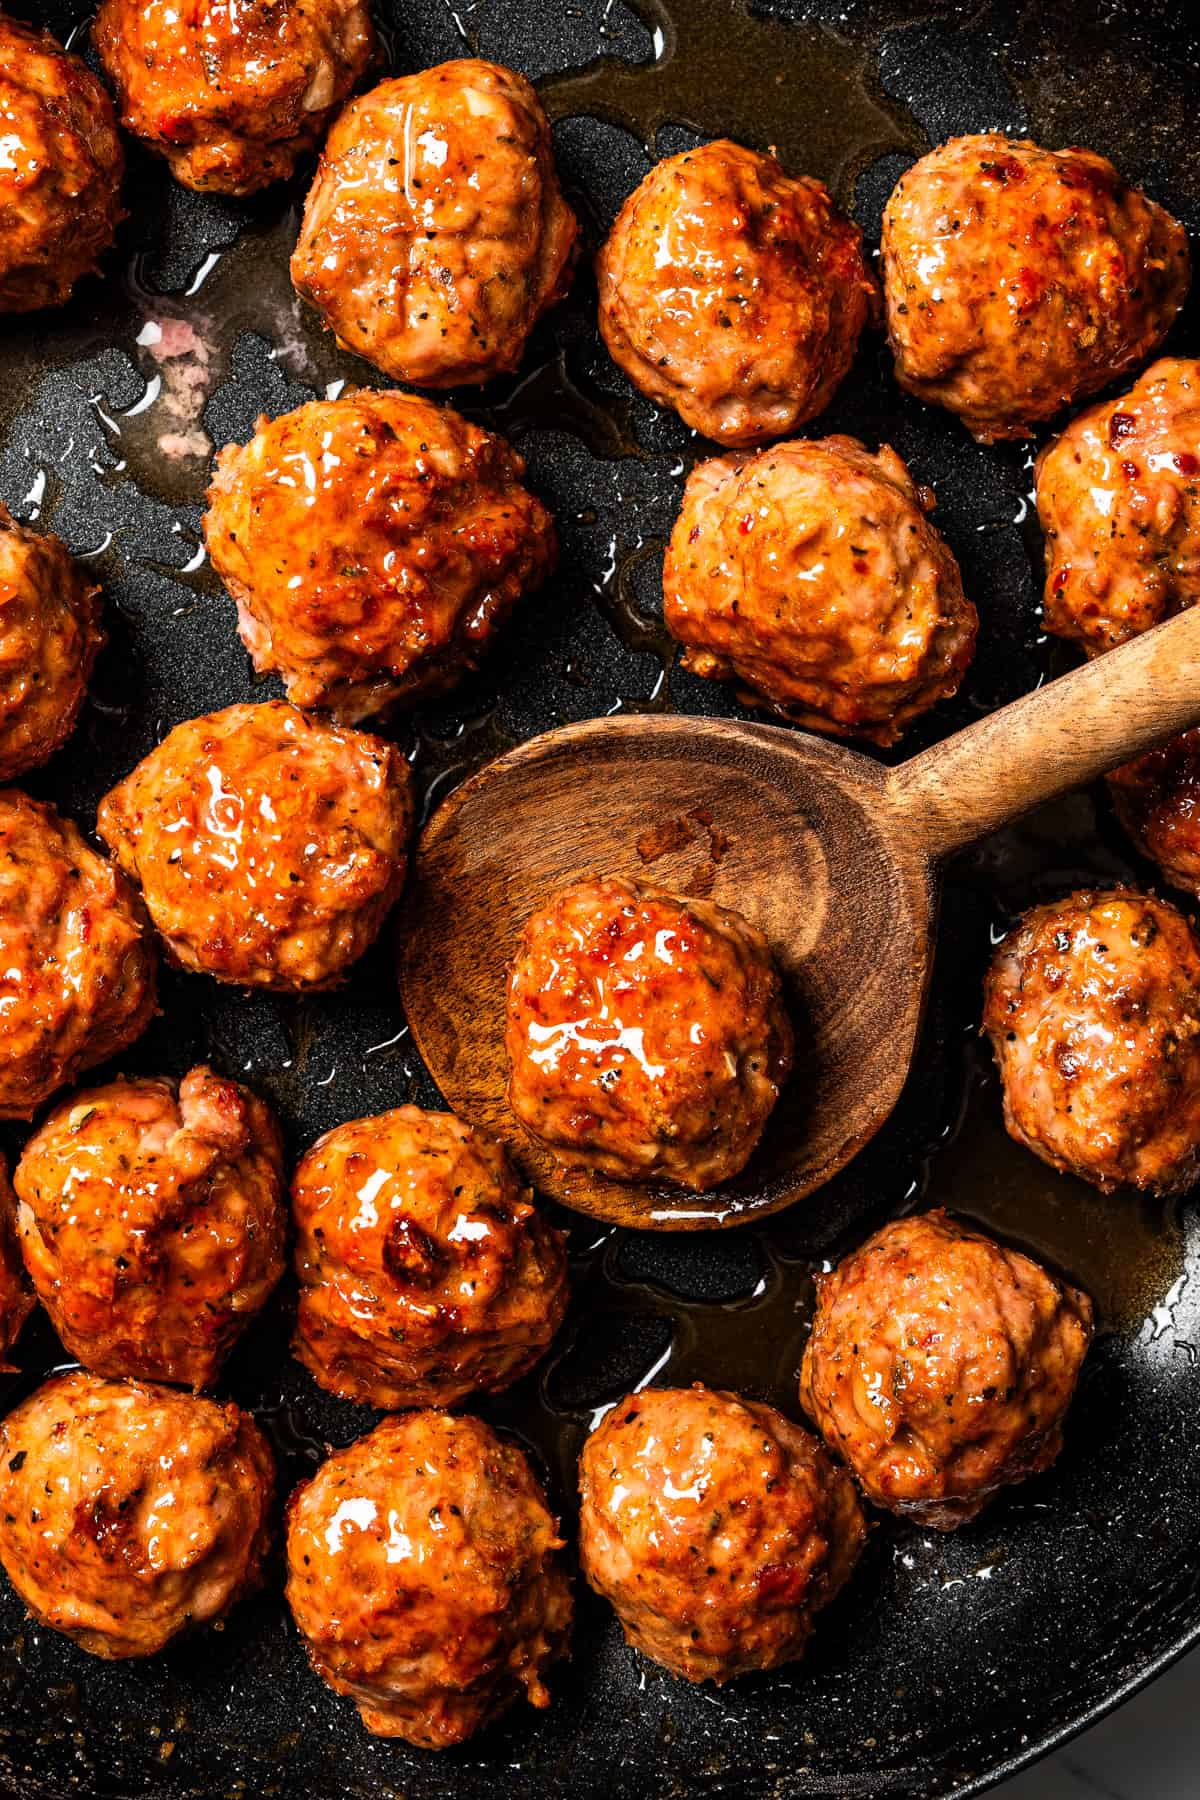 Close-up of a wooden spoon holding a meatball with more glazed turkey meatballs around it.